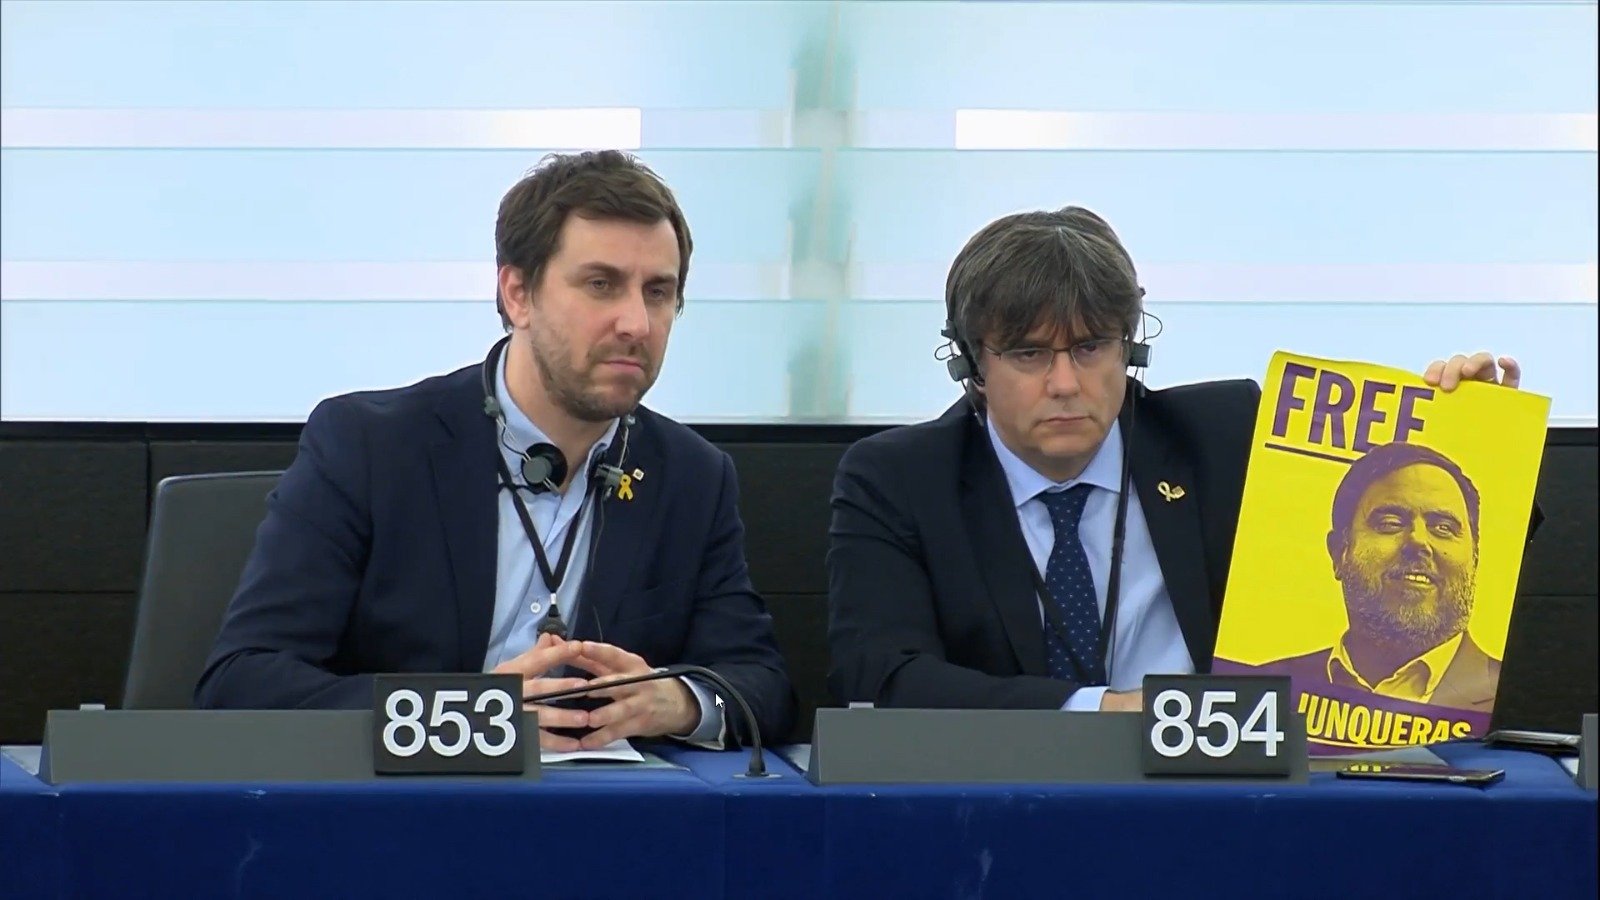 Video: Puigdemont's protest in the European Parliament over Junqueras's absence